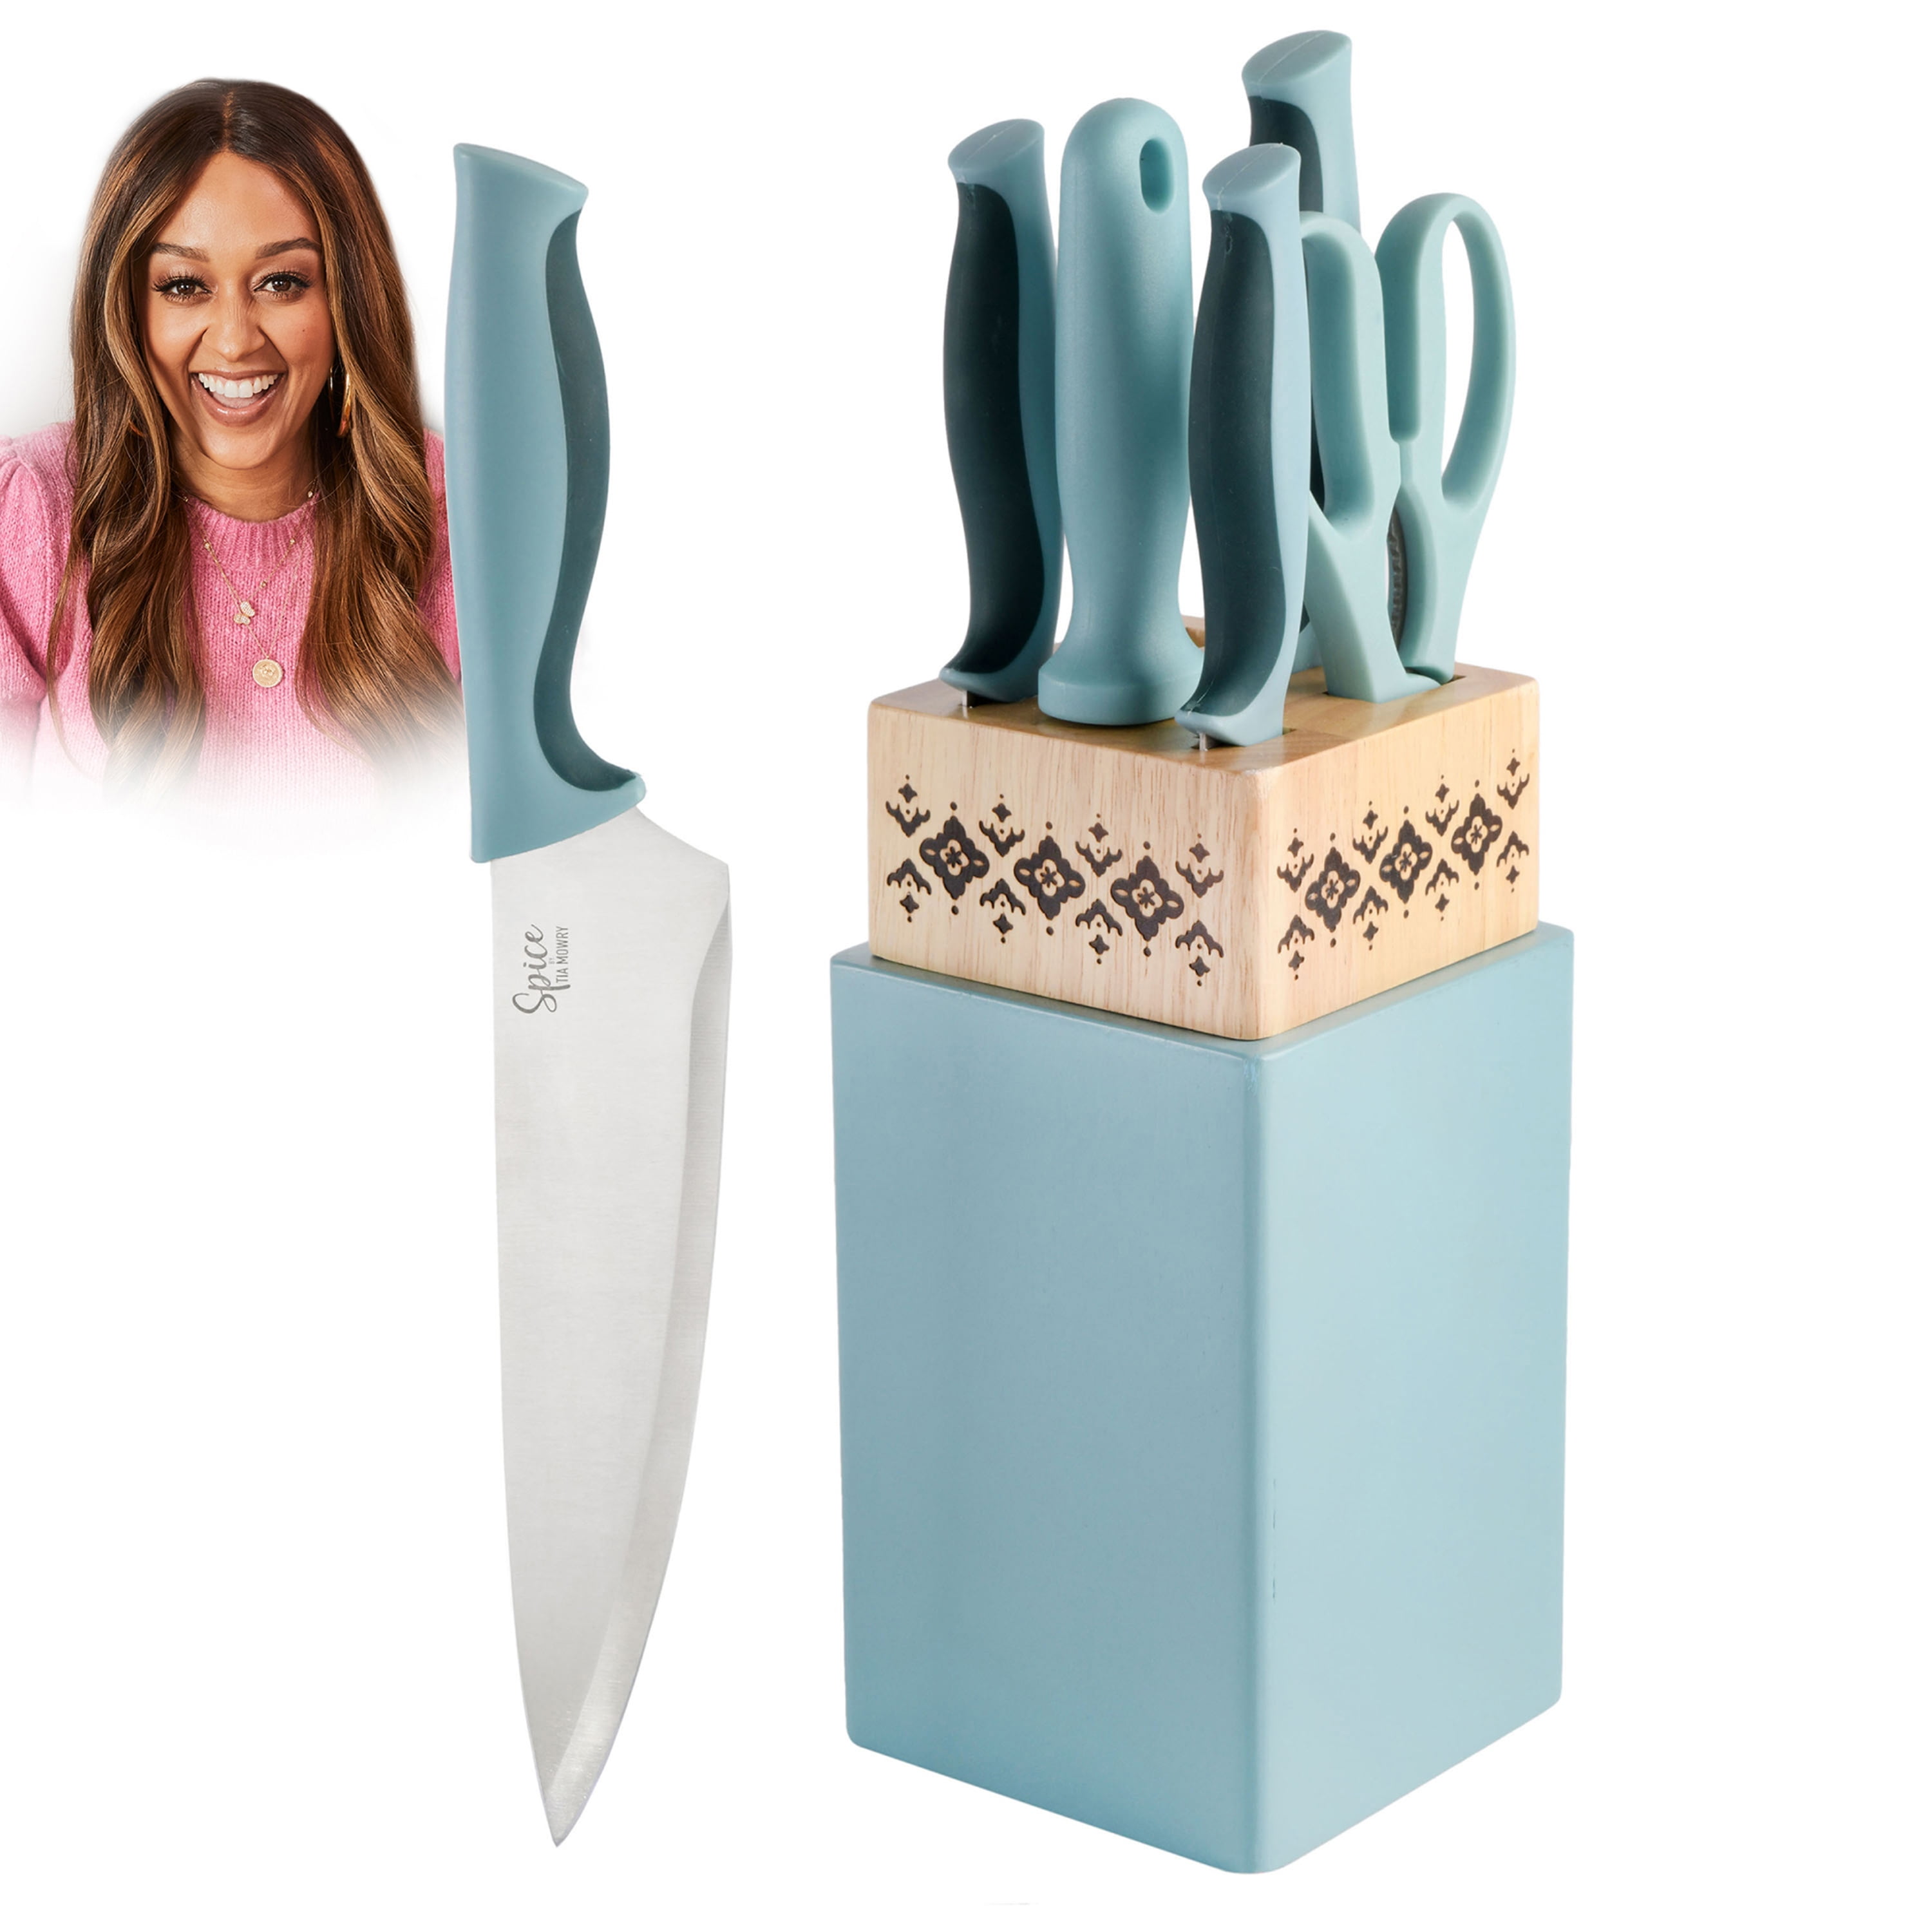 Spice by Tia Mowry - Savory Saffron Charcoal 7-Piece Cutlery set with Block  